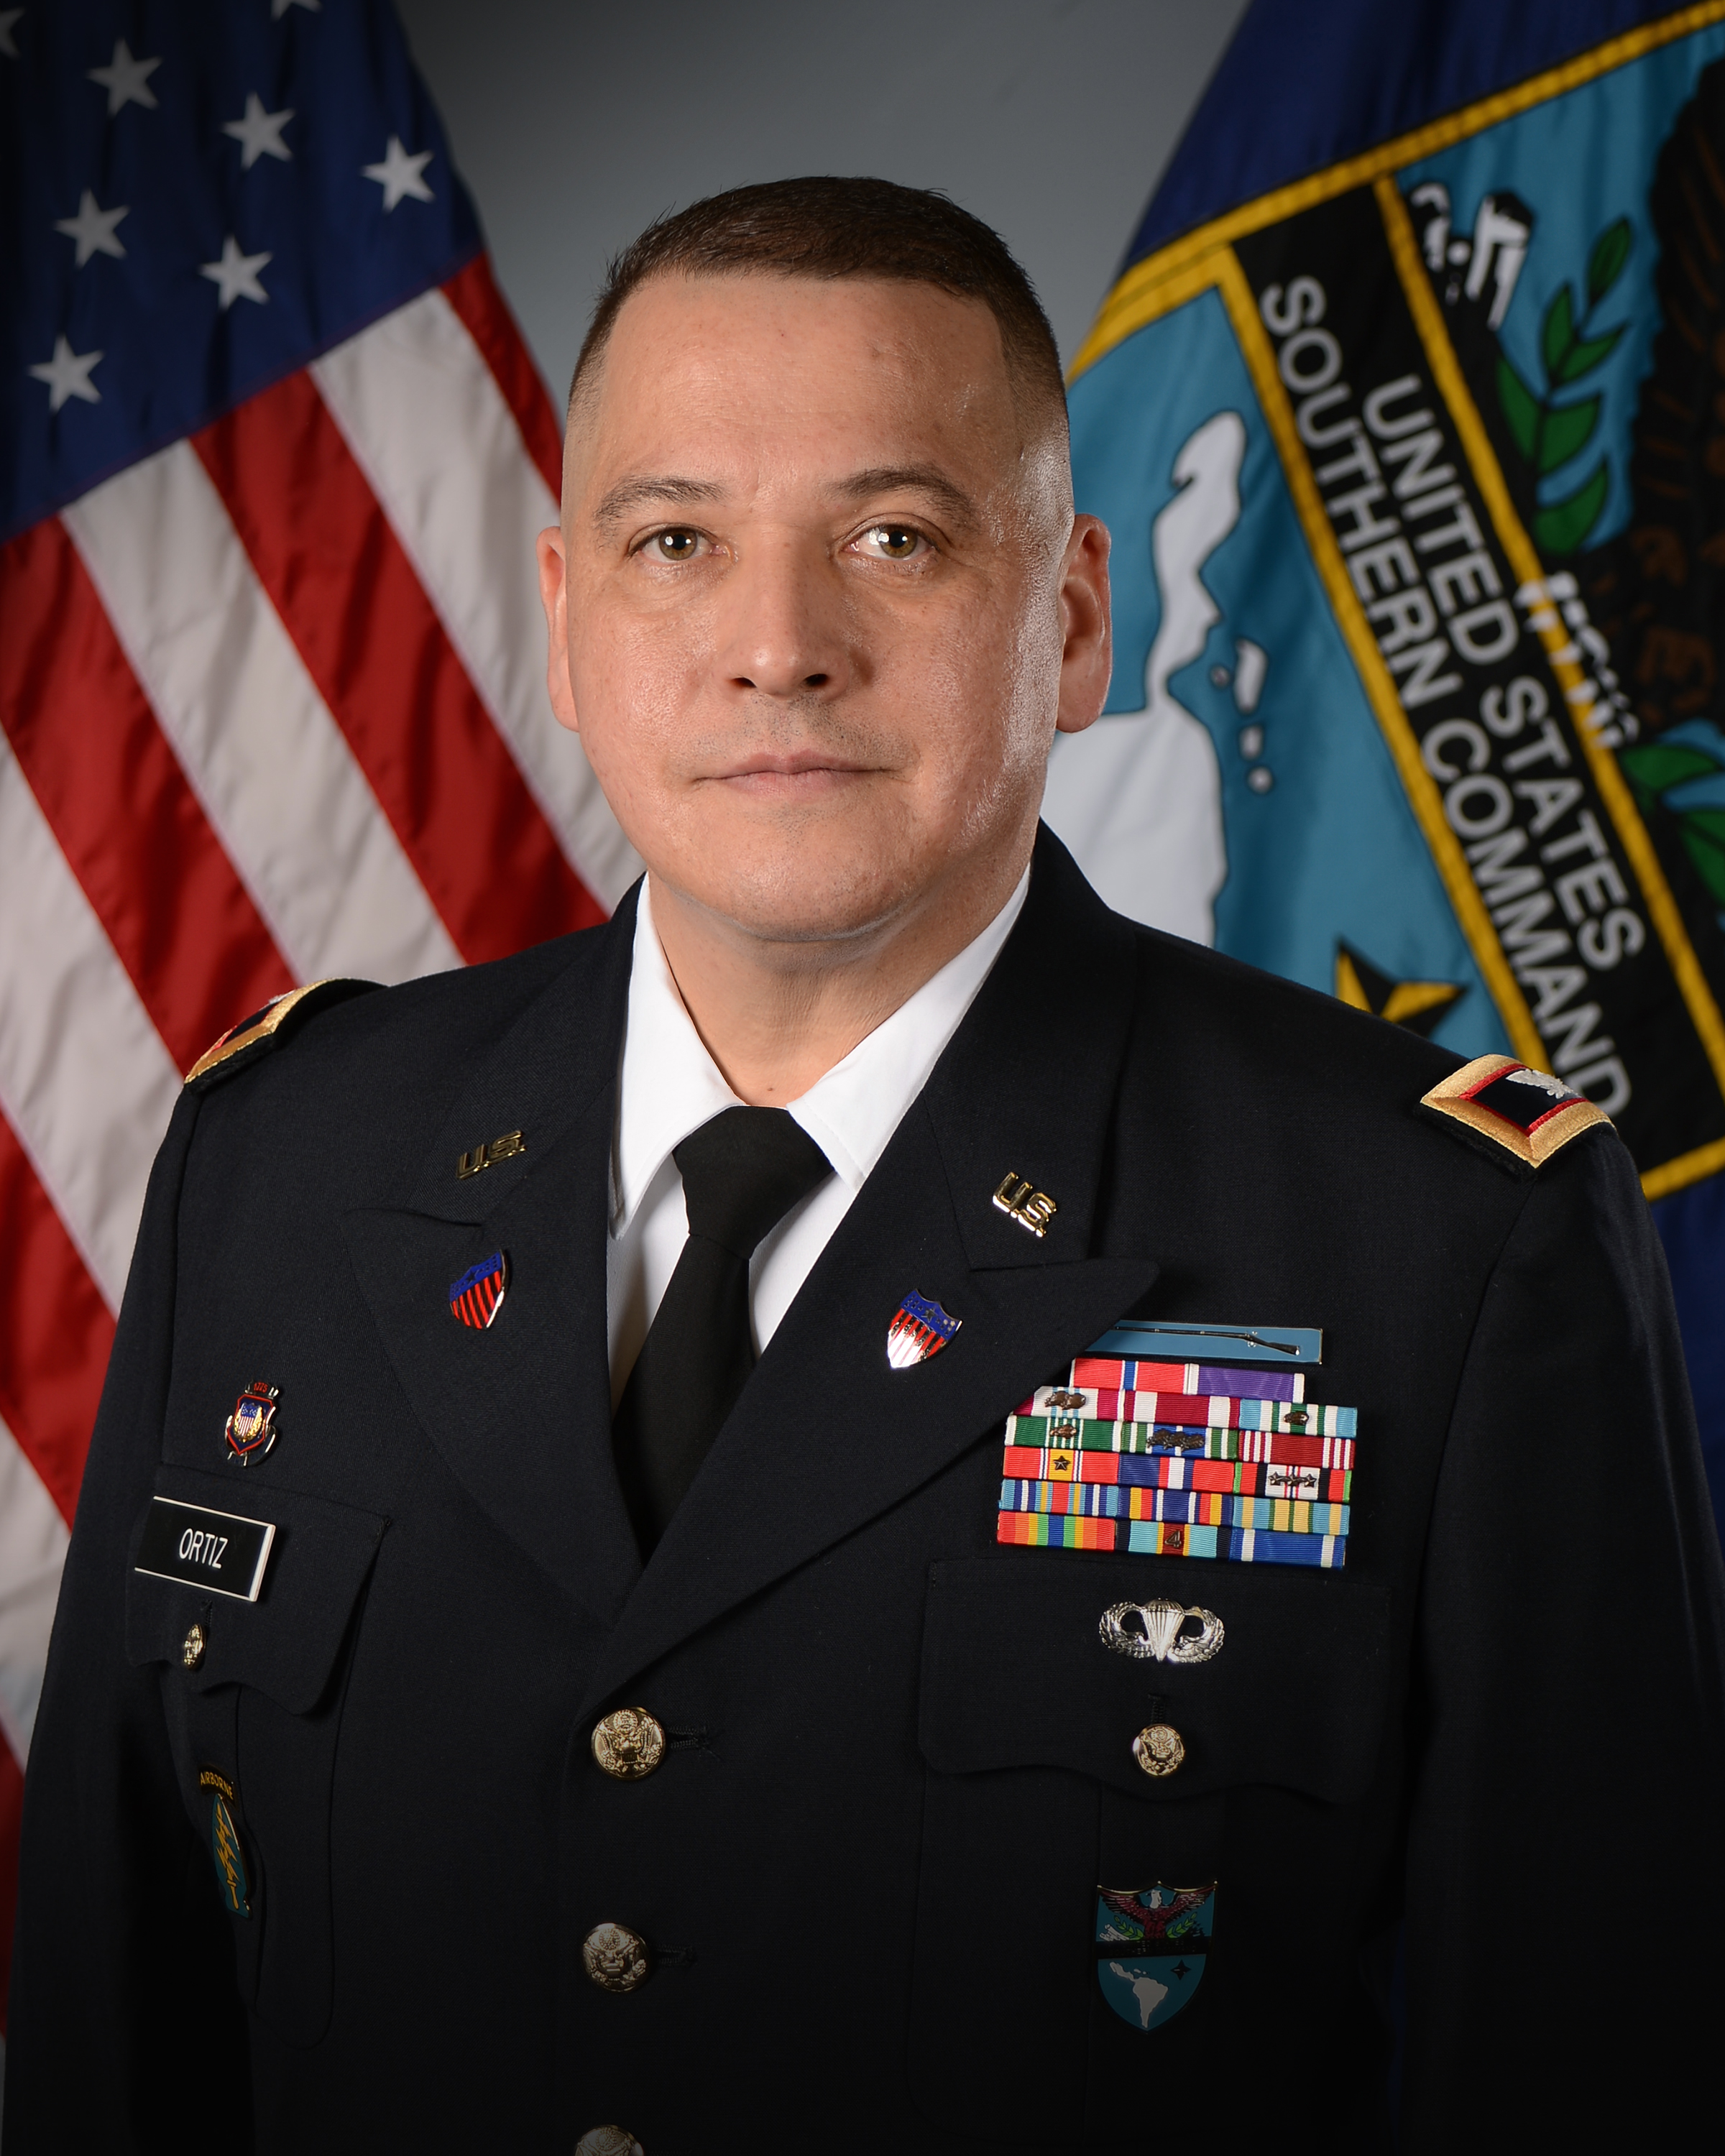 Official biography photo of Army Col. Manny Ortiz